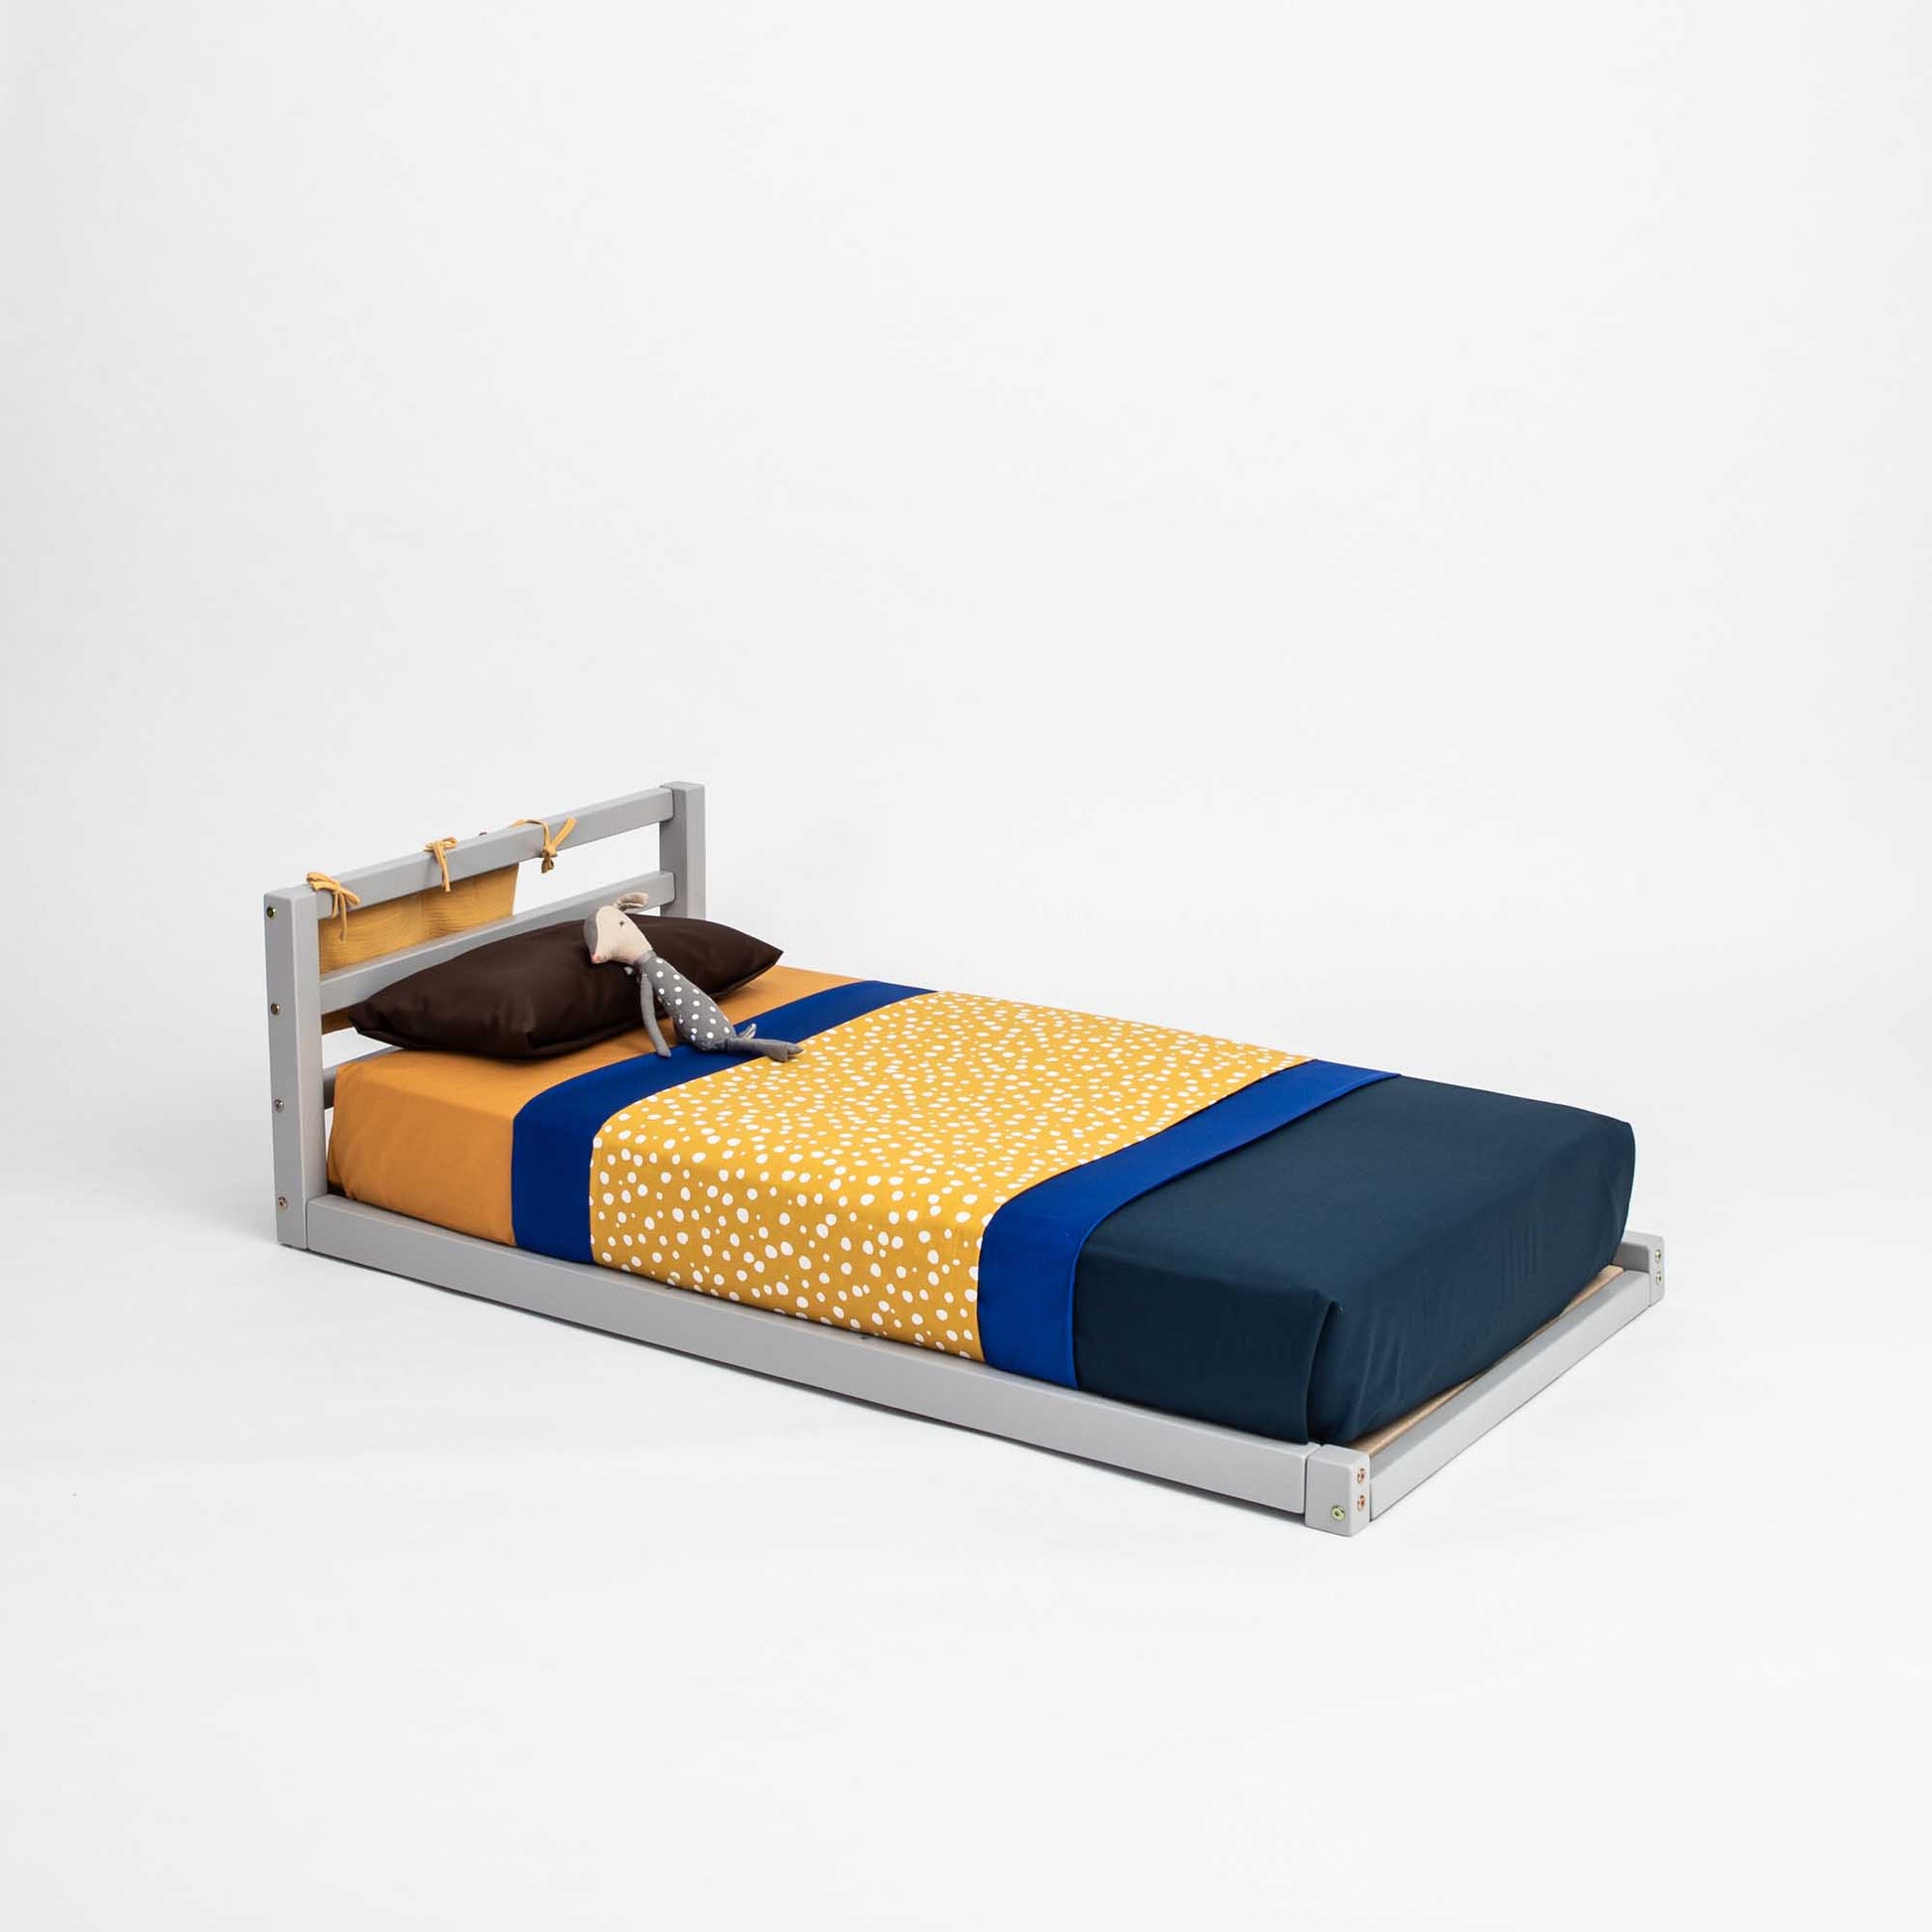 A cheerful Sweet Home From Wood toddler floor bed with a horizontal rail headboard and a playful yellow and blue polka dot cover.